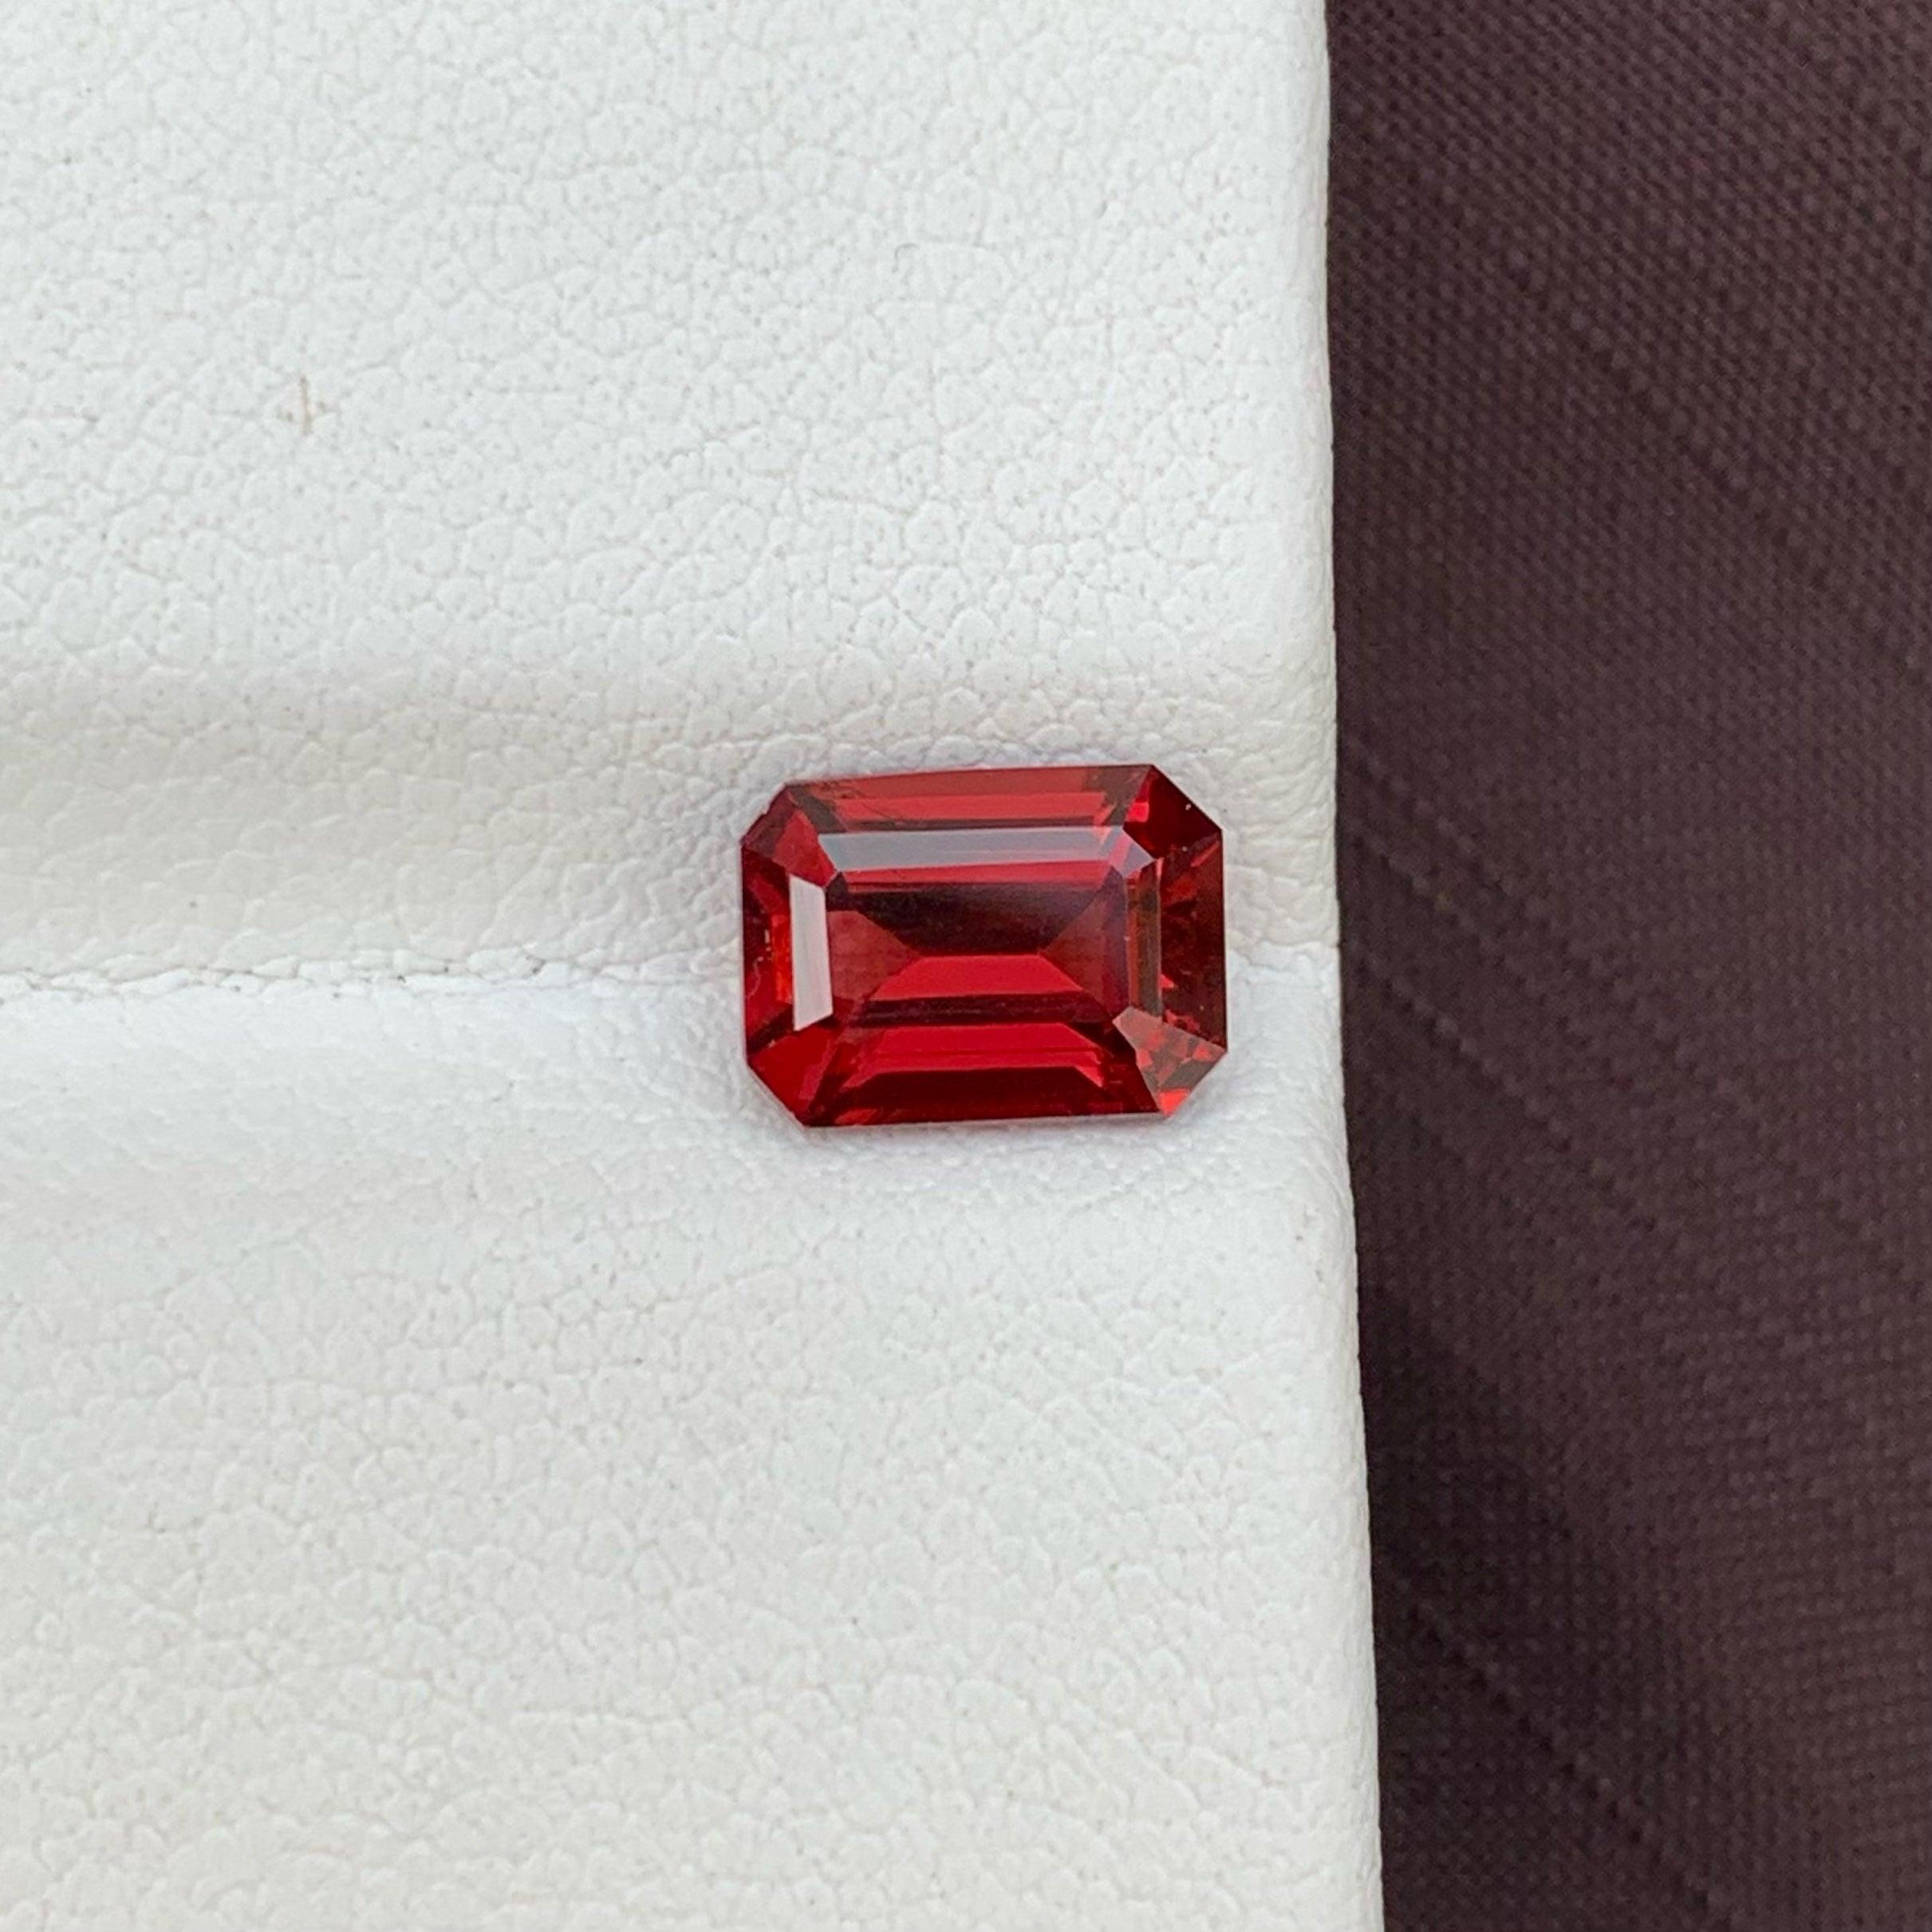 Bright Red Garnet Loose Gemstone From Malawi, Available For Sale at Wholesale Price Natural High Quality 2.10 Carats Unheated  Garnet Gemstone From Malawi.

Product Information:
GEMSTONE NAME: Bright Red Garnet Loose Gemstone From